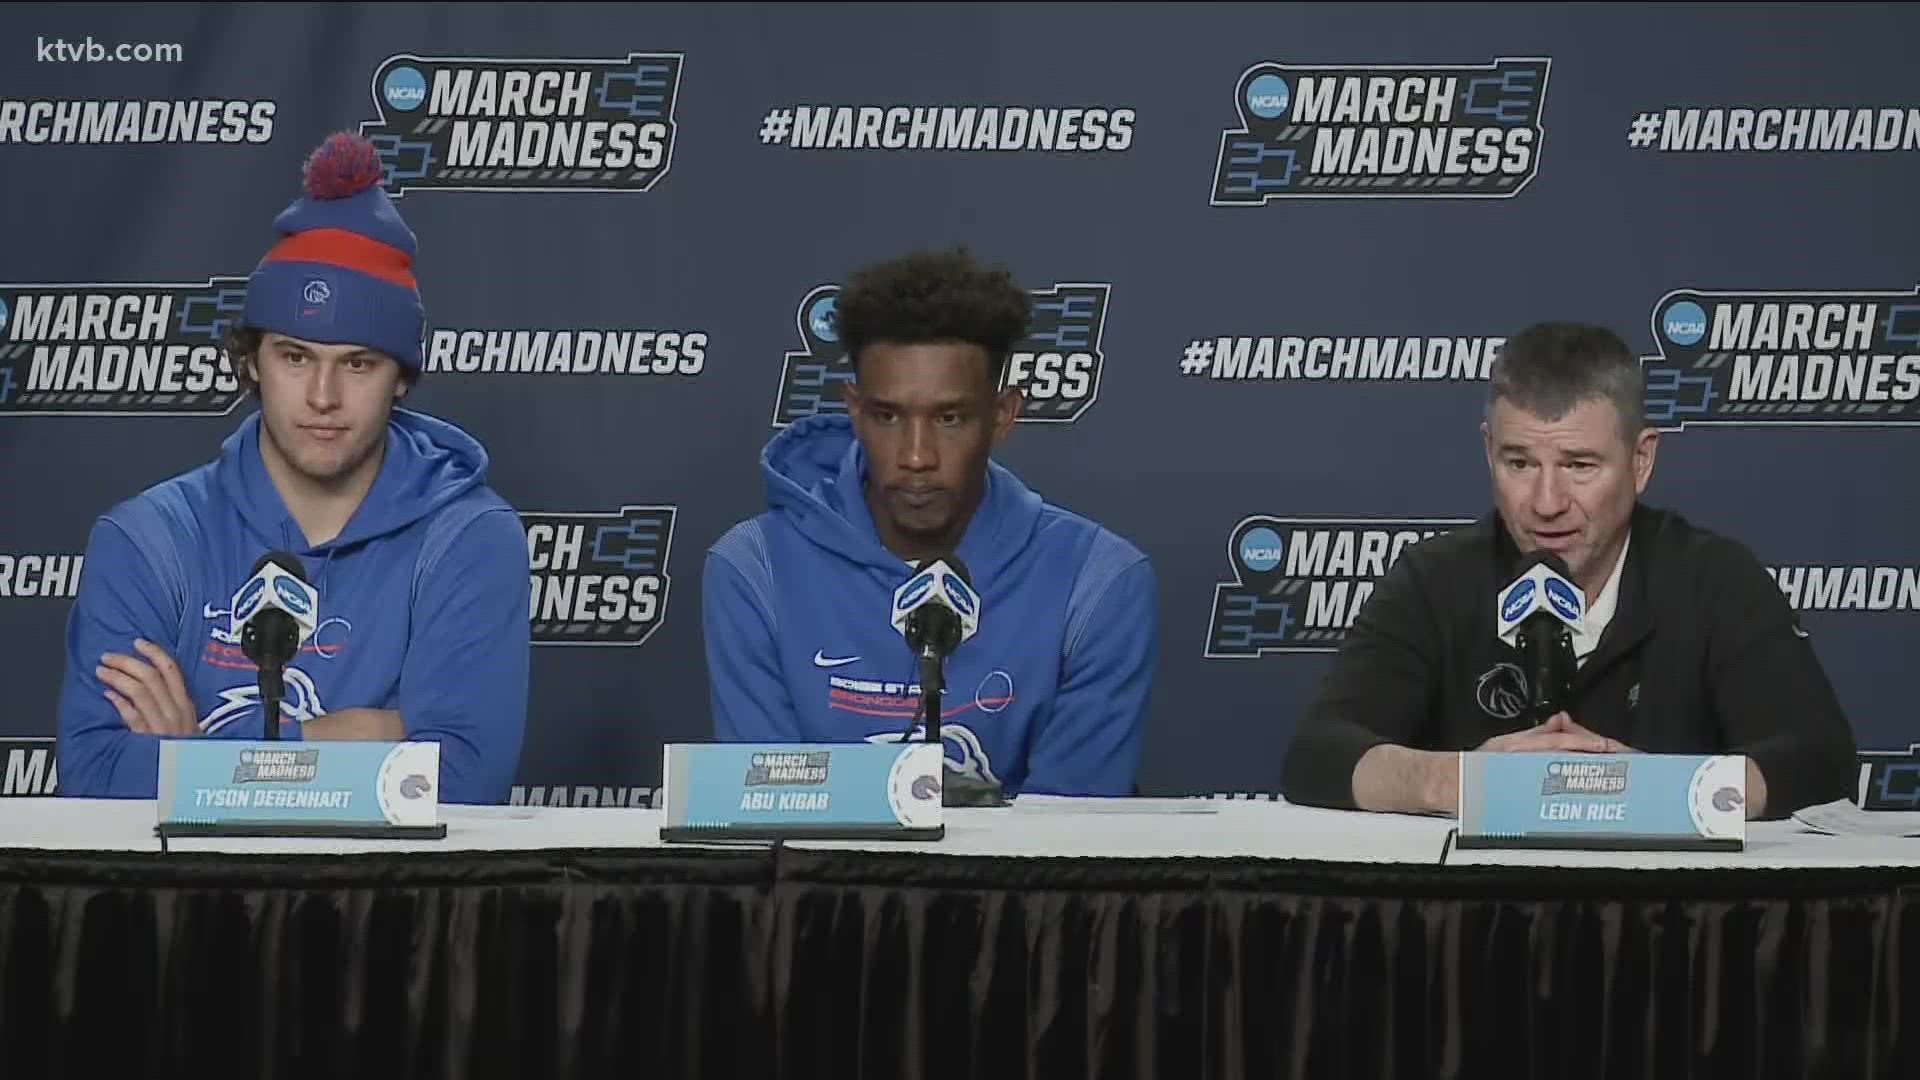 Despite a gritty second-half effort, the Boise State men's basketball team fell 64-53 to Memphis on Thursday in the first round of the NCAA Tournament.